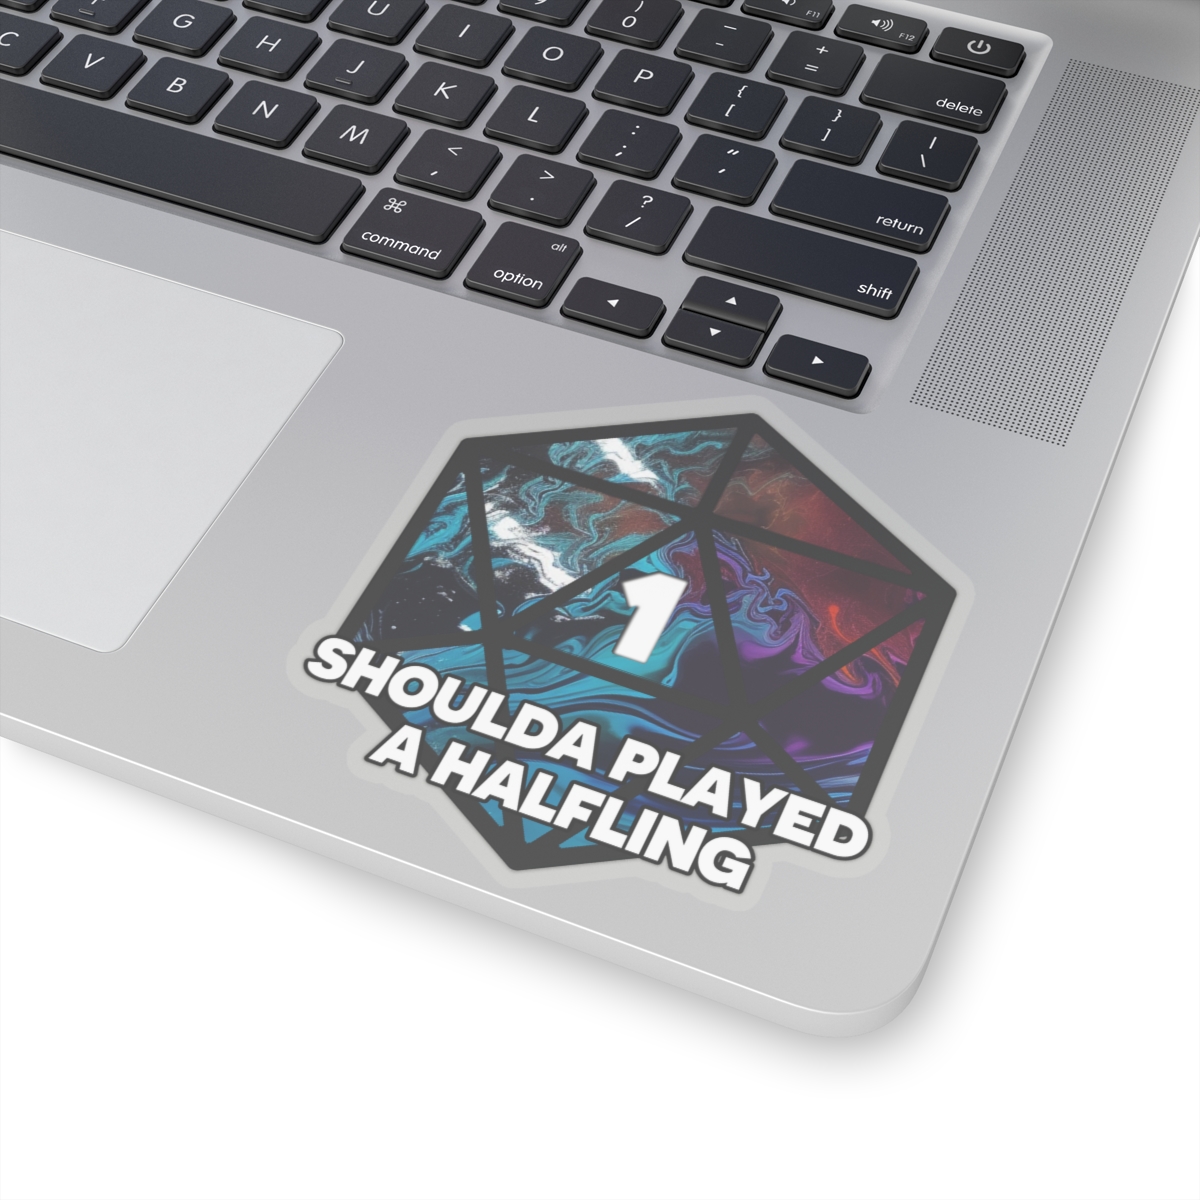 Natural One: Shoulda played a halfling - Funny RPG Stickers - various sizes in transparent and white. product main image